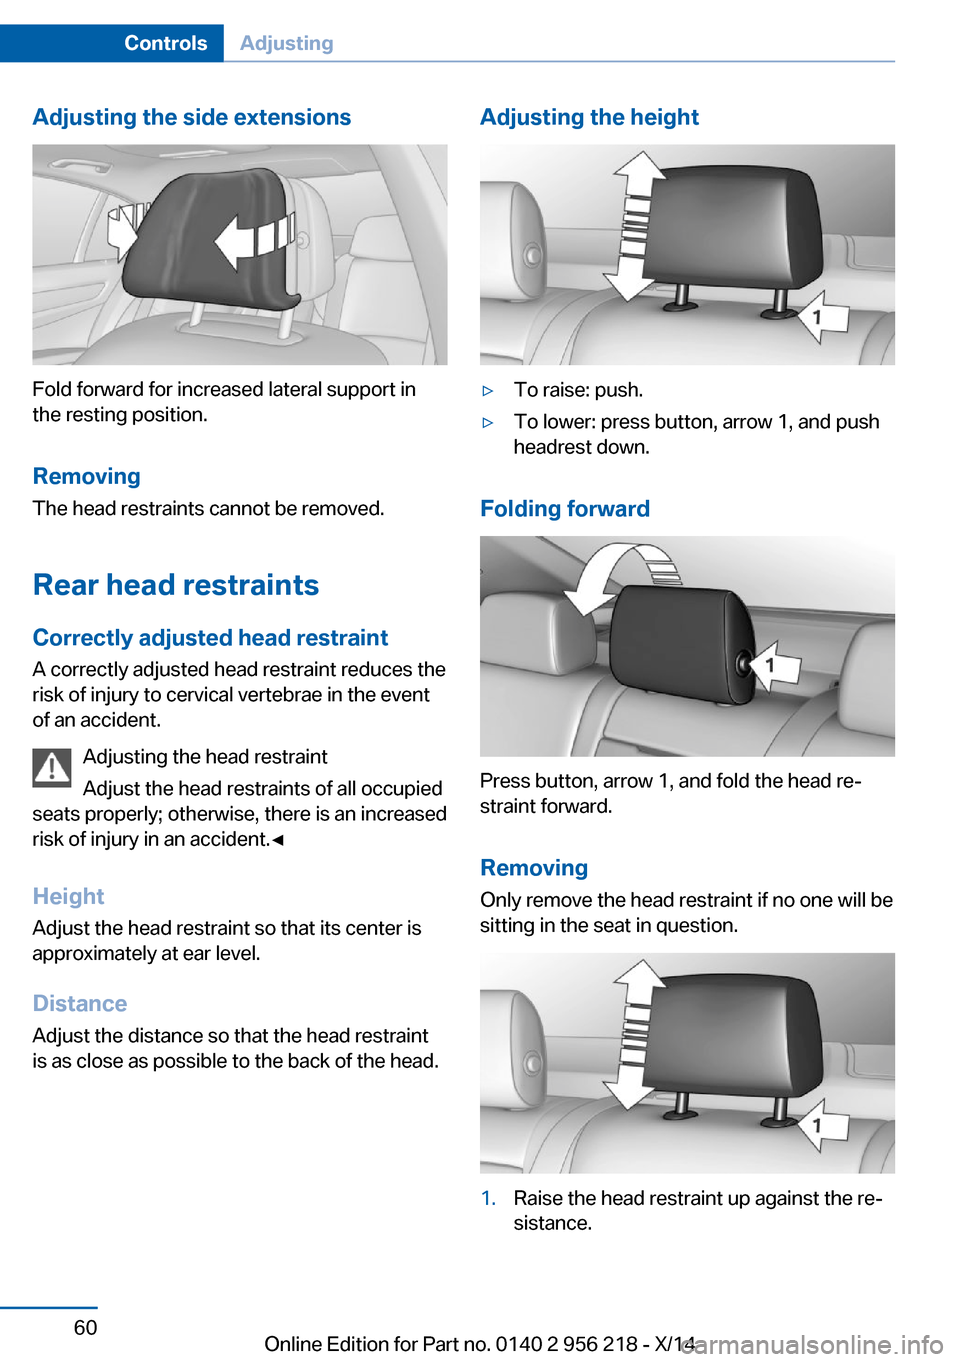 BMW 5 SERIES 2014 F10 Service Manual Adjusting the side extensions
Fold forward for increased lateral support in
the resting position.
Removing The head restraints cannot be removed.
Rear head restraints
Correctly adjusted head restraint